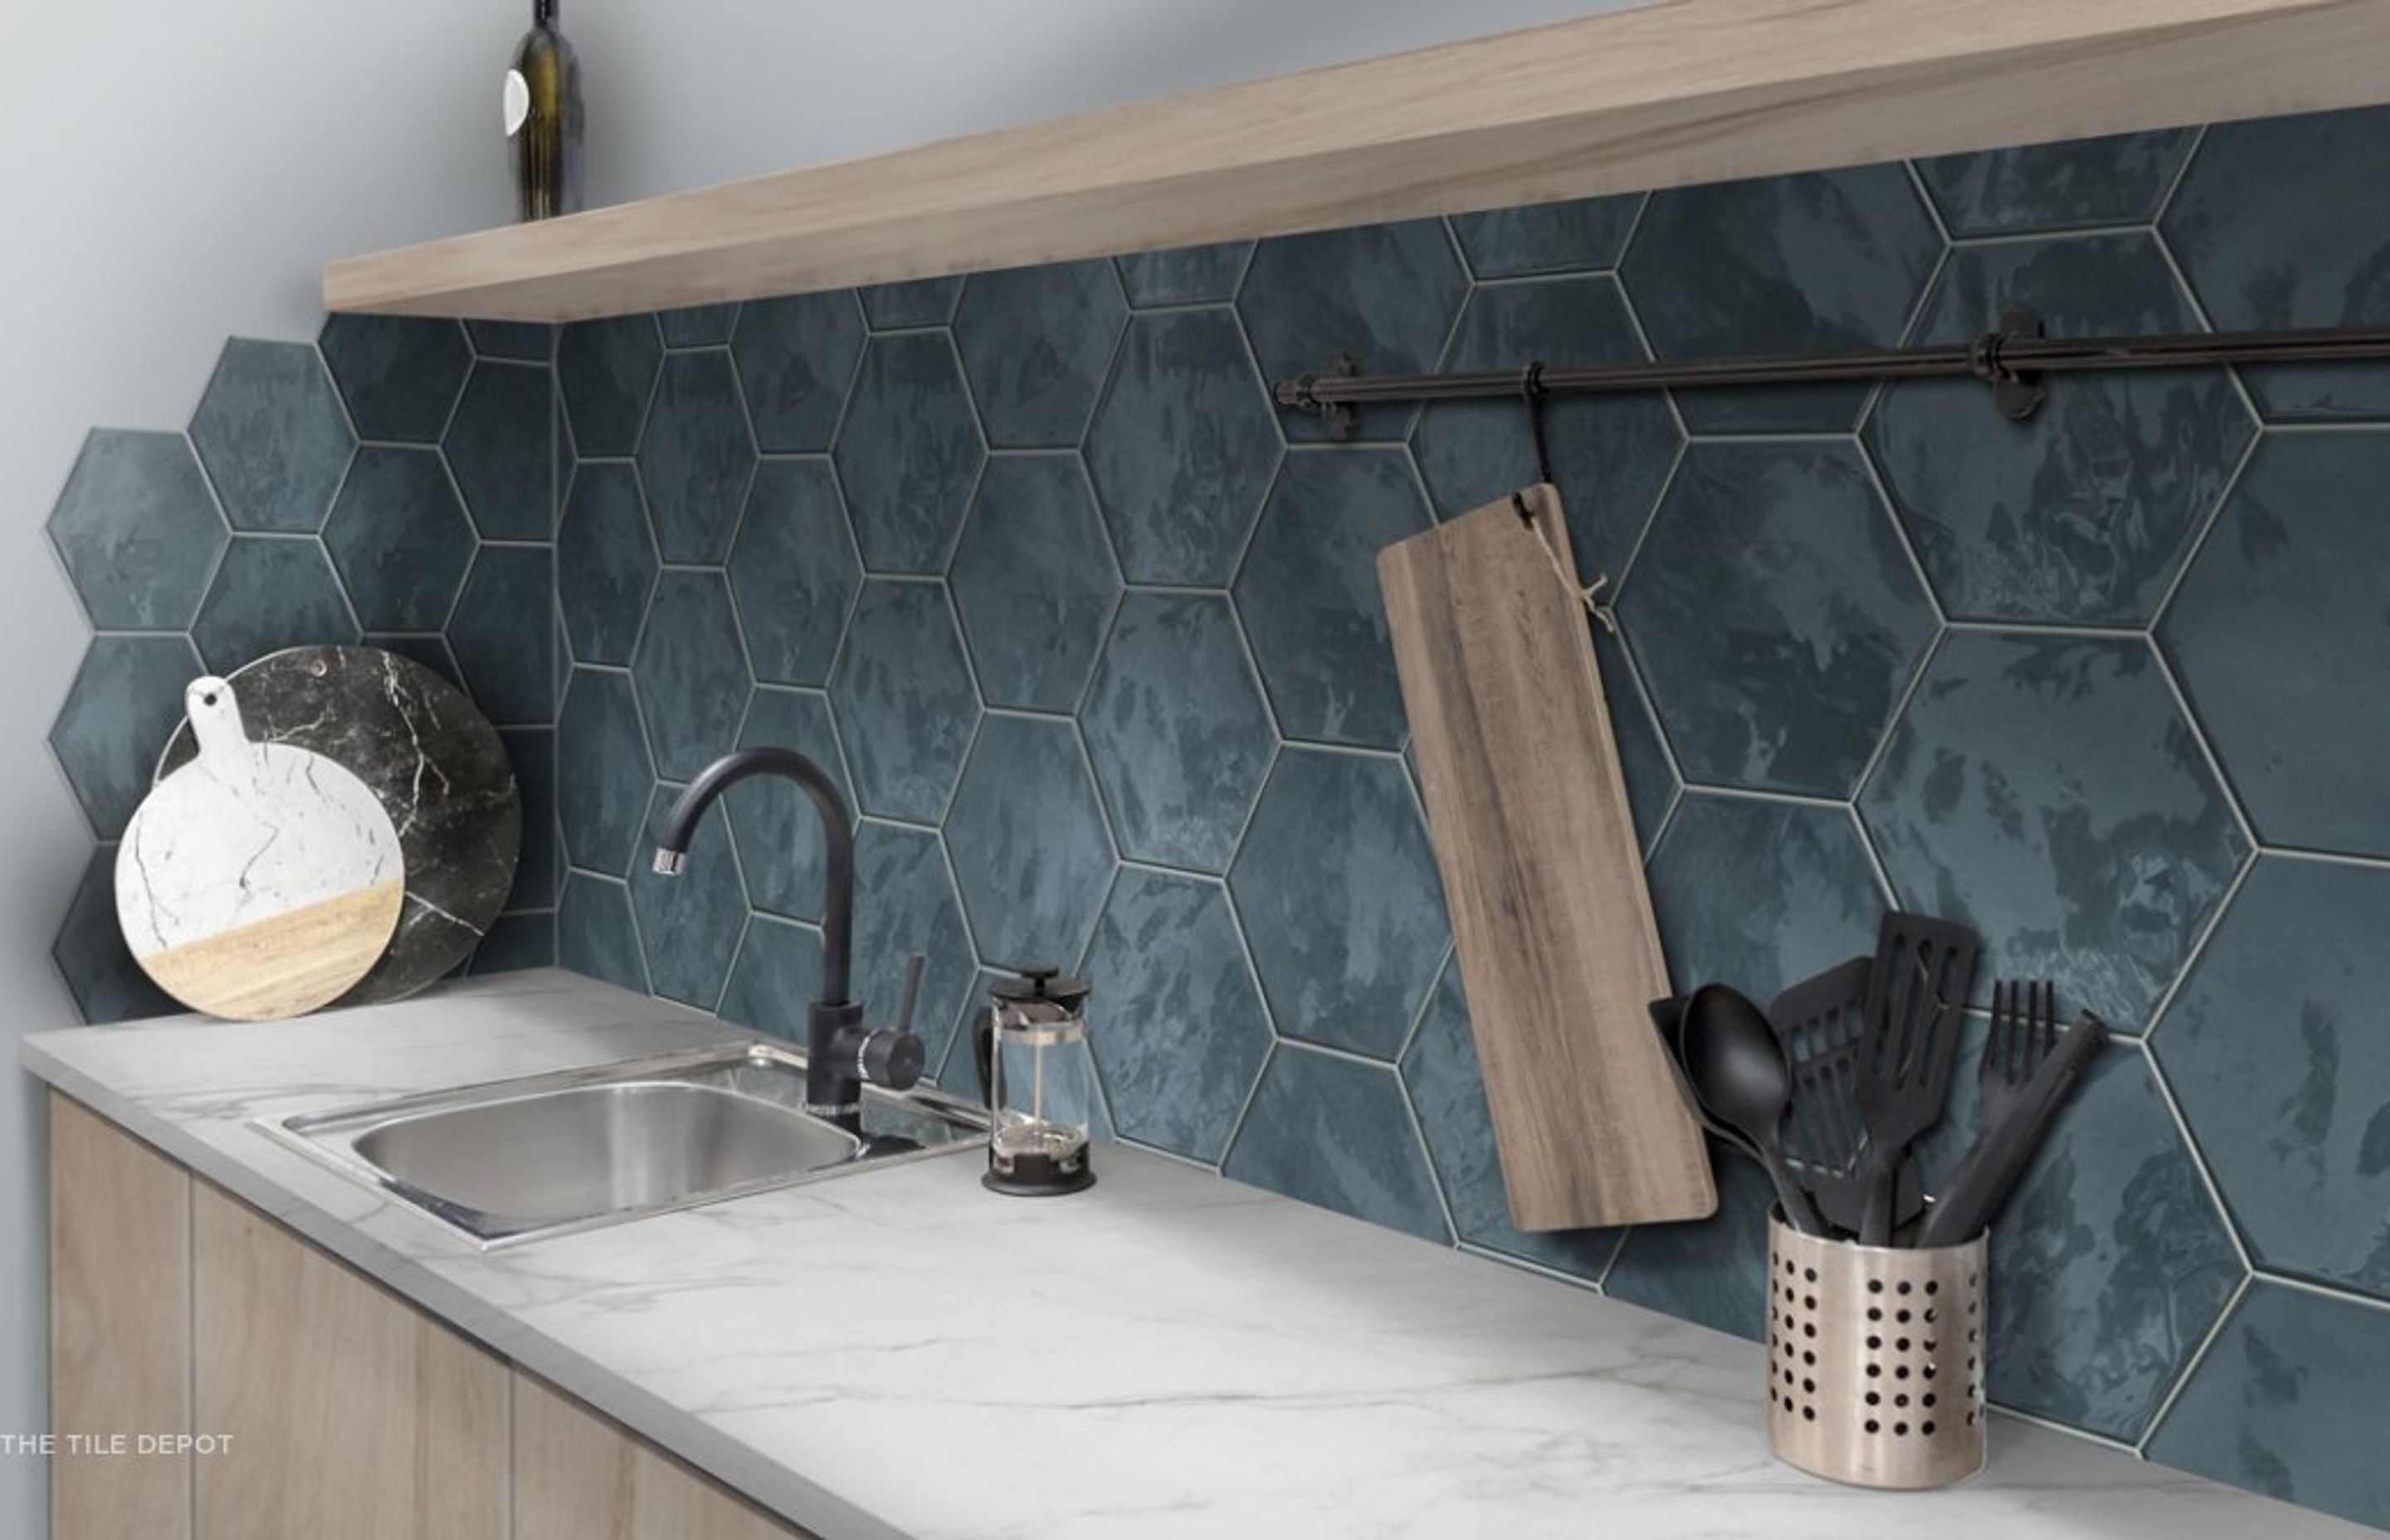 This tiled splashback is textured and has grout lines, however the surface is smooth to touch and the grouting is sealed which makes cleaning easy. This is from the Hexa tile collection at Tile Depot (Tile depot 2021)